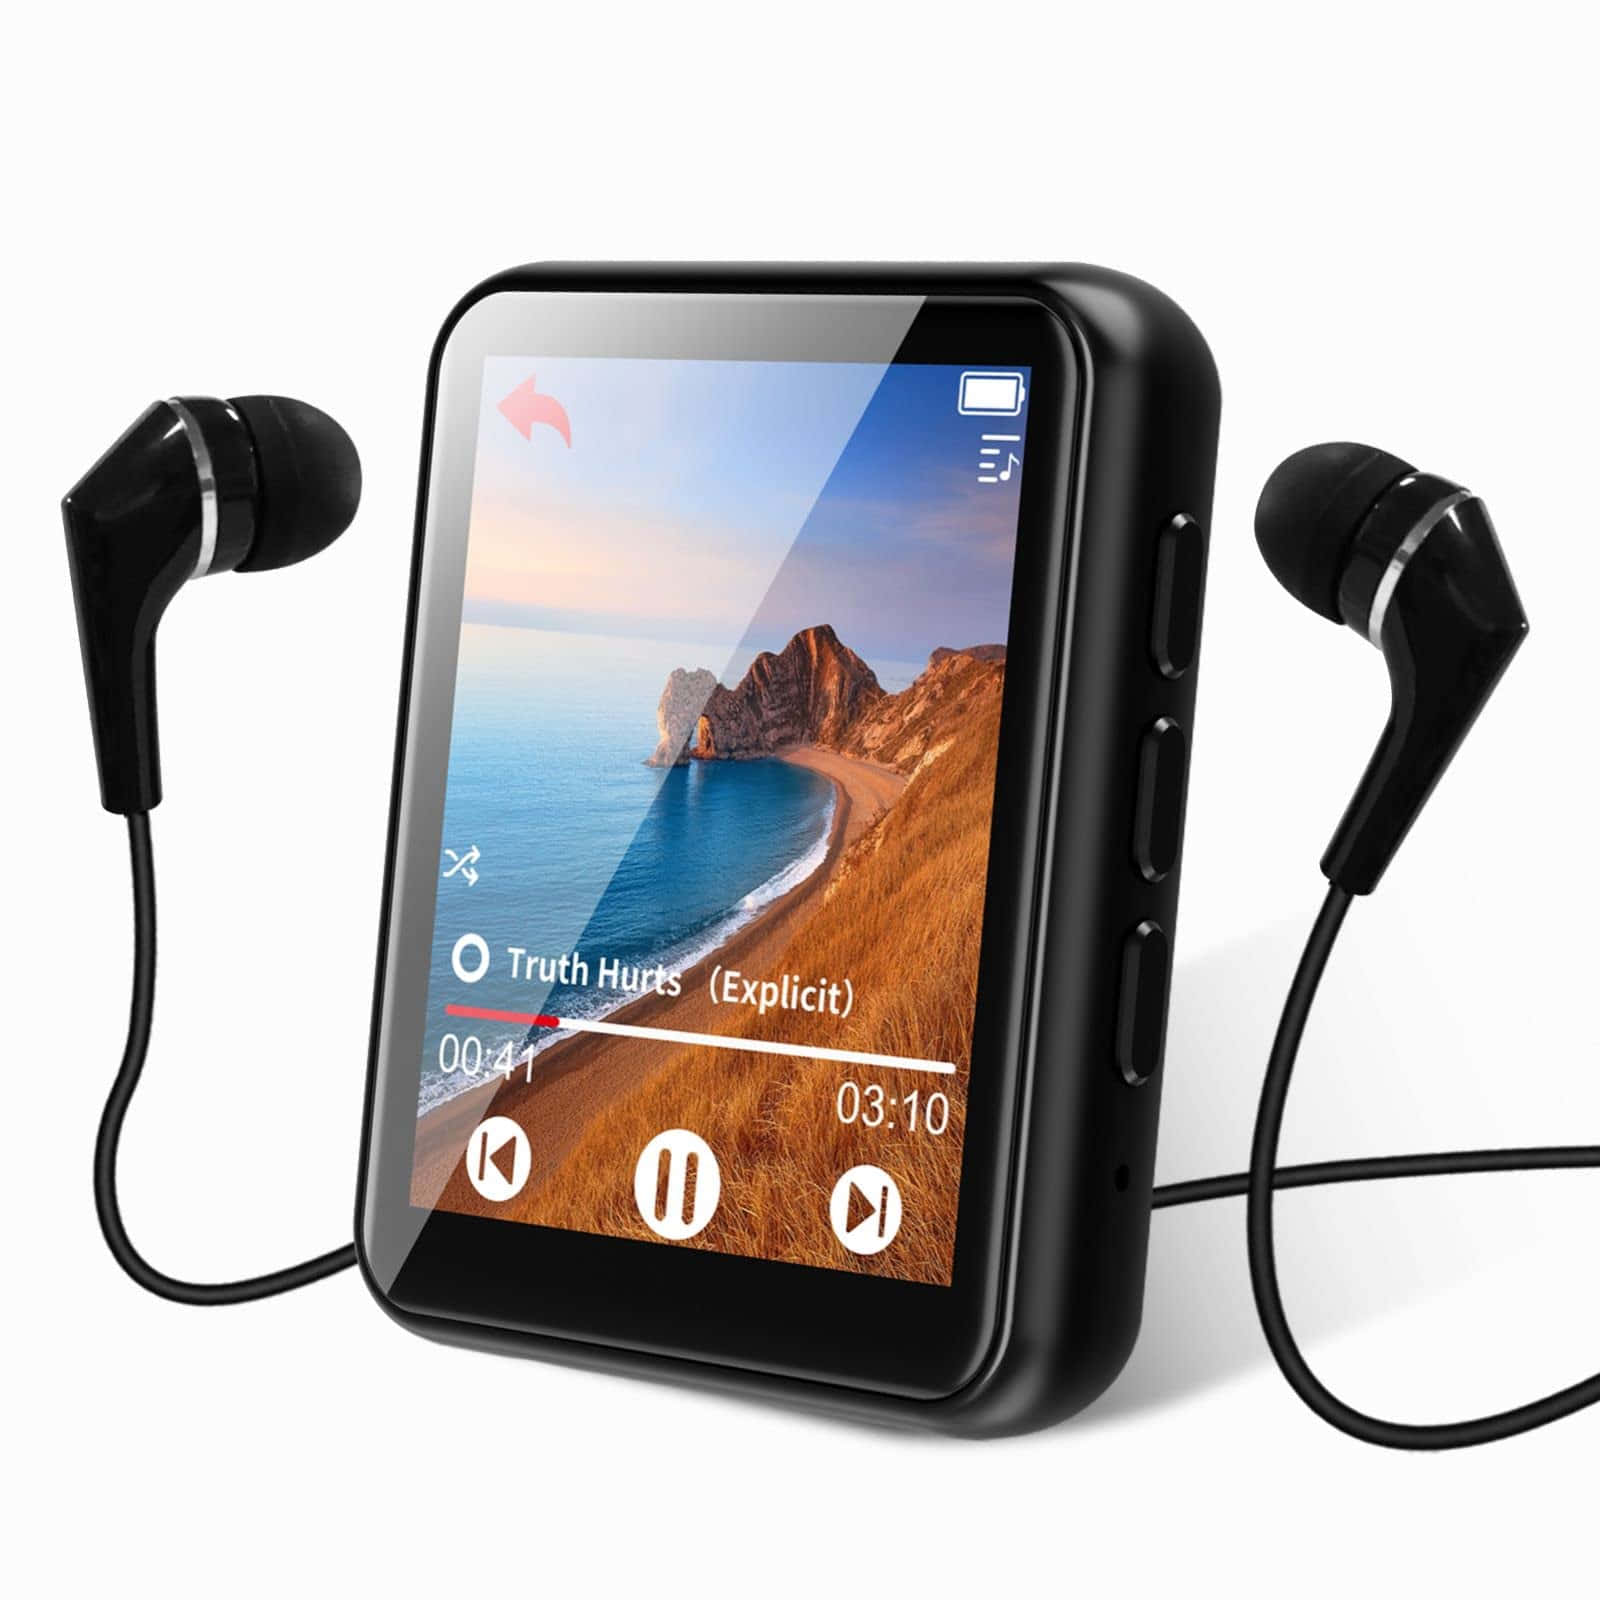 a black mp3 player with headphones